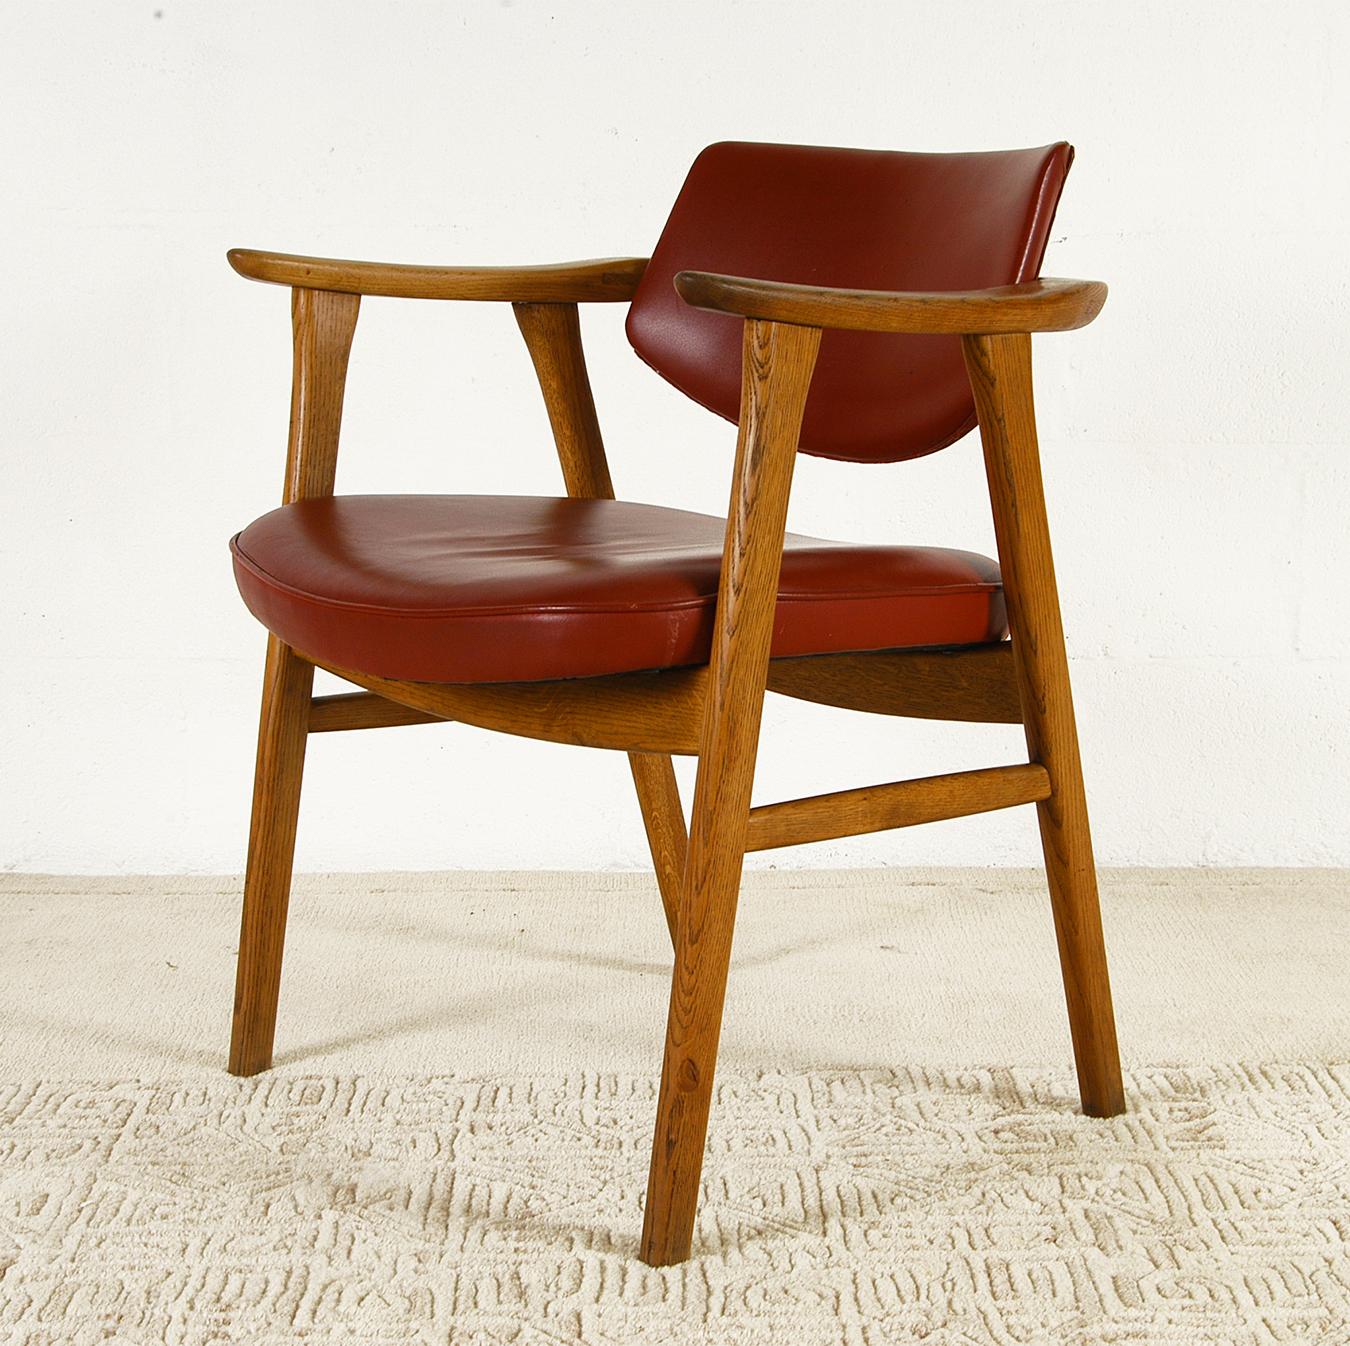 A good Danish open armchair / desk chair, model 53 in oak, designed by Erik Kirkegaard for Høng Stolefabrik, Denmark in the early to mid-1960s.
Substantial solid oak frame and red leather upholstery designed for long periods of sitting make this a